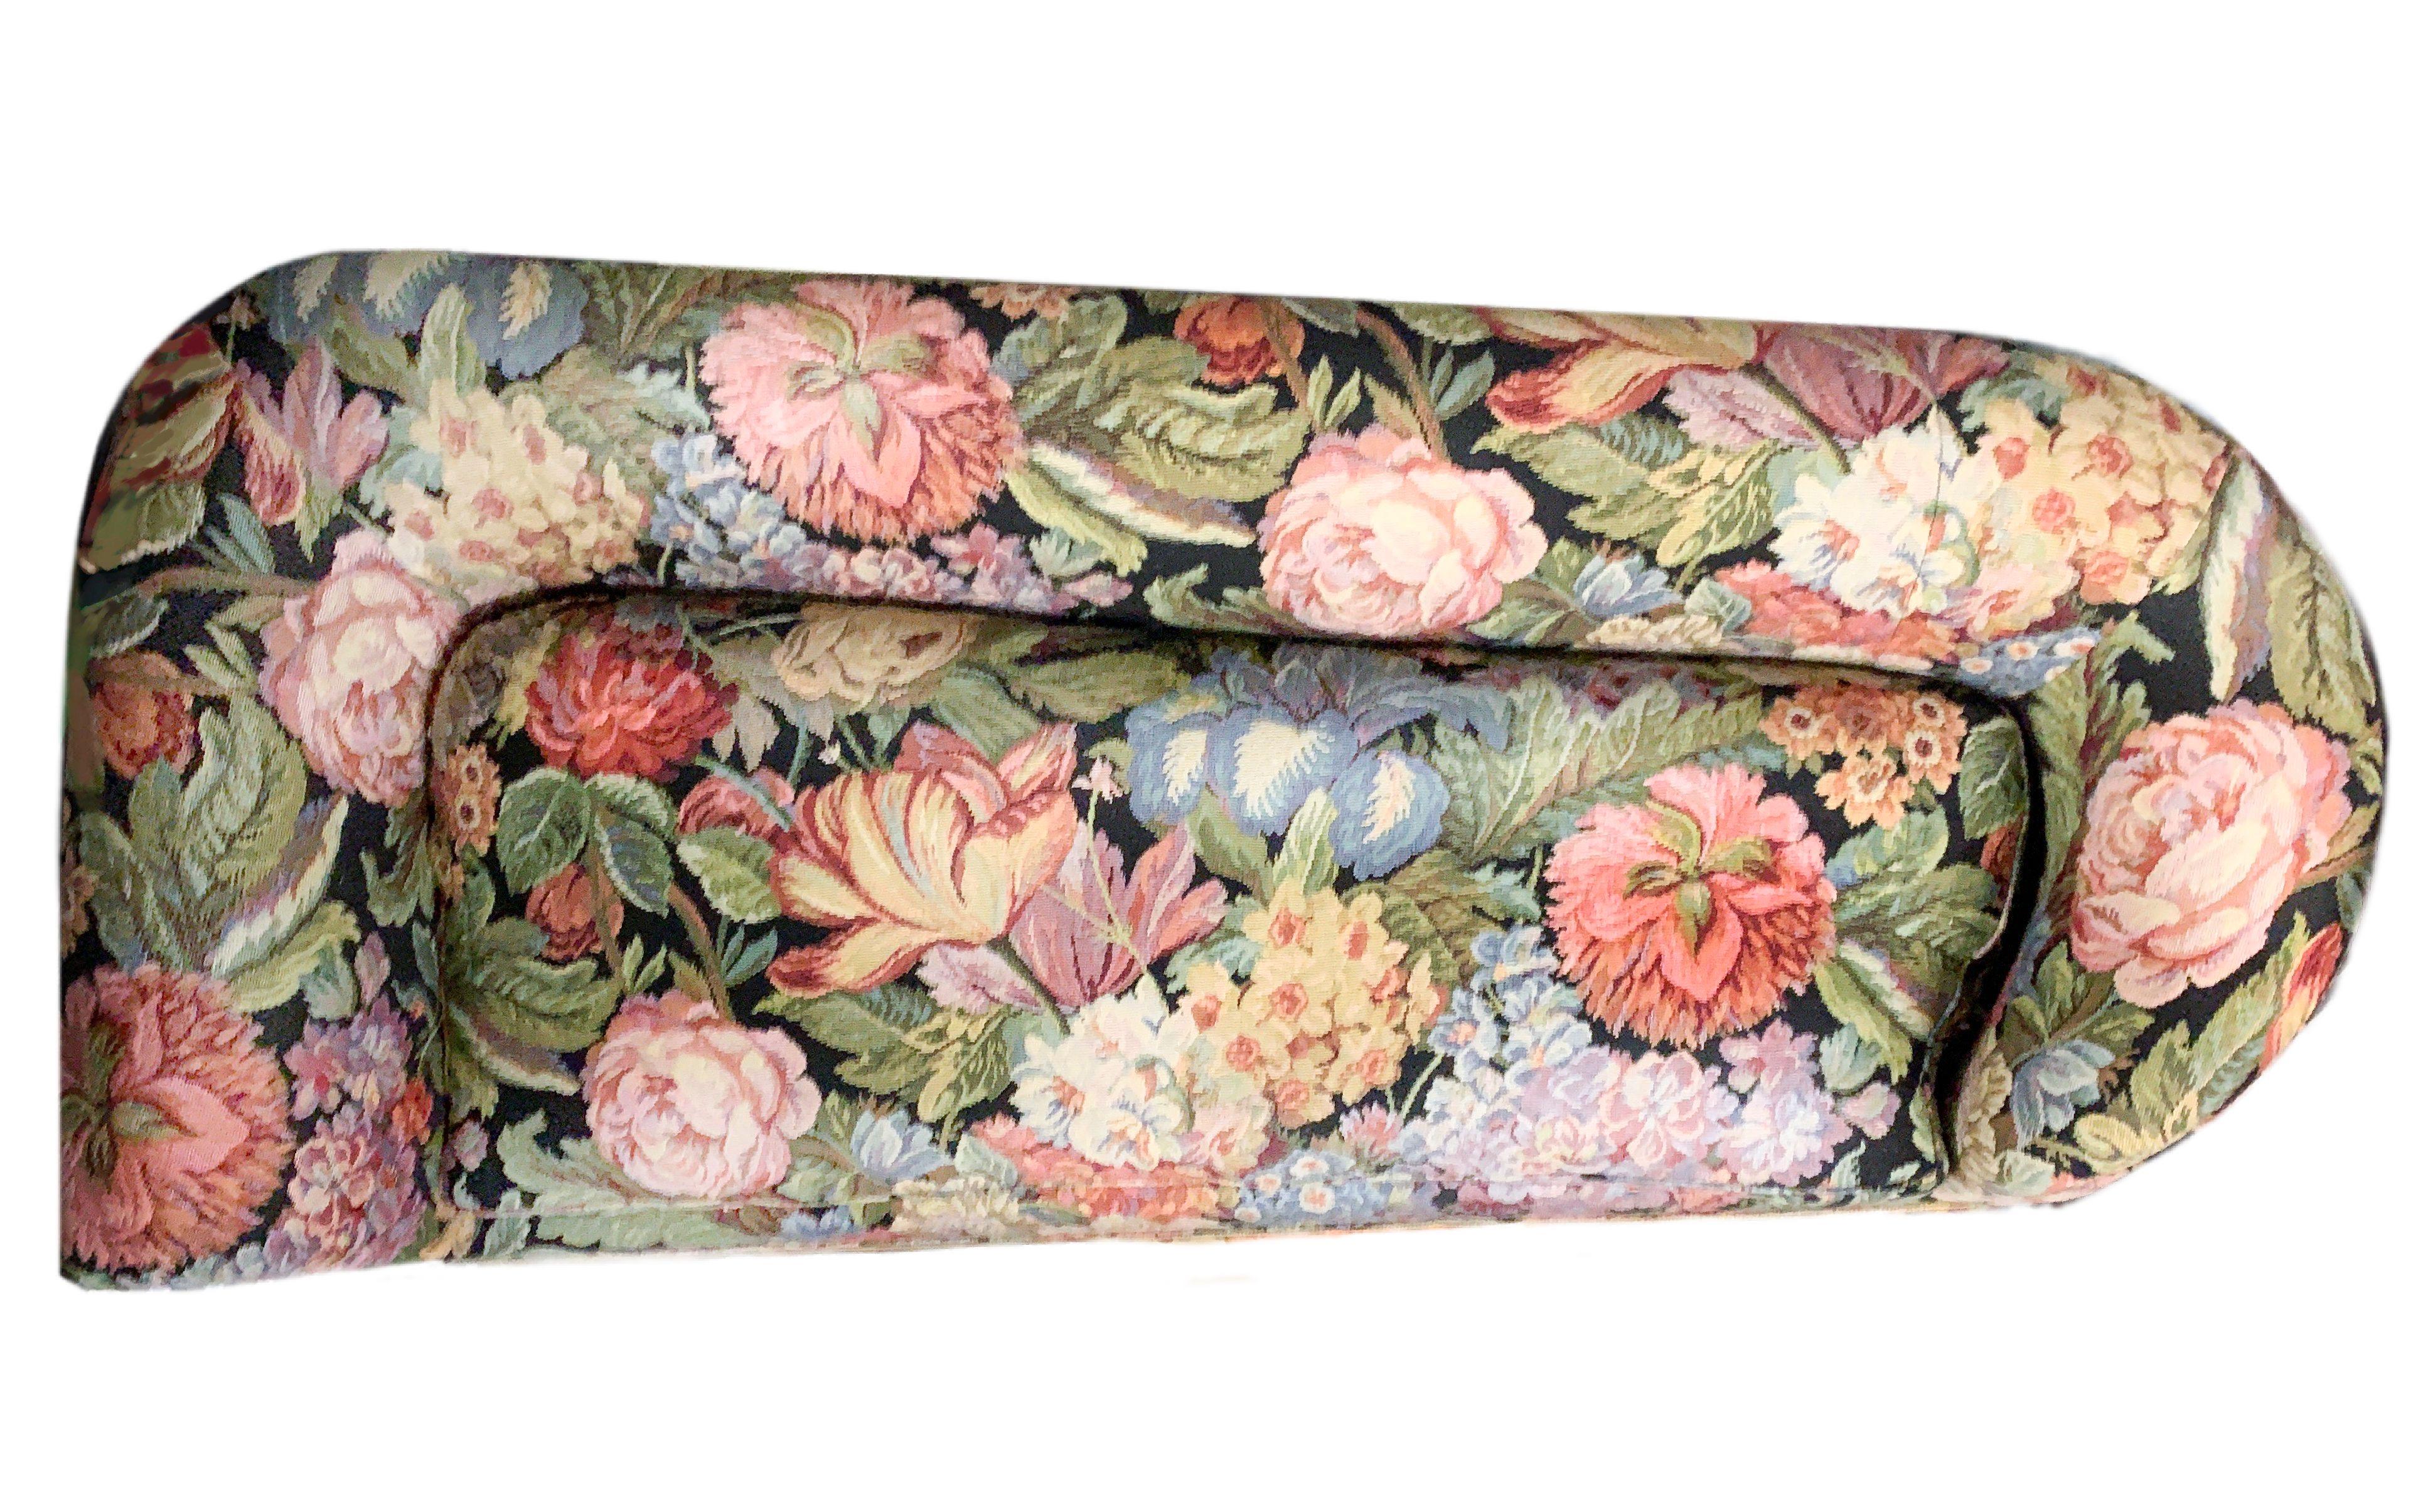 Vintage Postmodern floral tapestry Recamier loveseat sofa, colorful Scalamandre fringe. Well-made custom piece. Scale of print is genius and lends this piece a fresh Postmodern whimsy to its neoclassical French form.  Seat pan depth spans 27